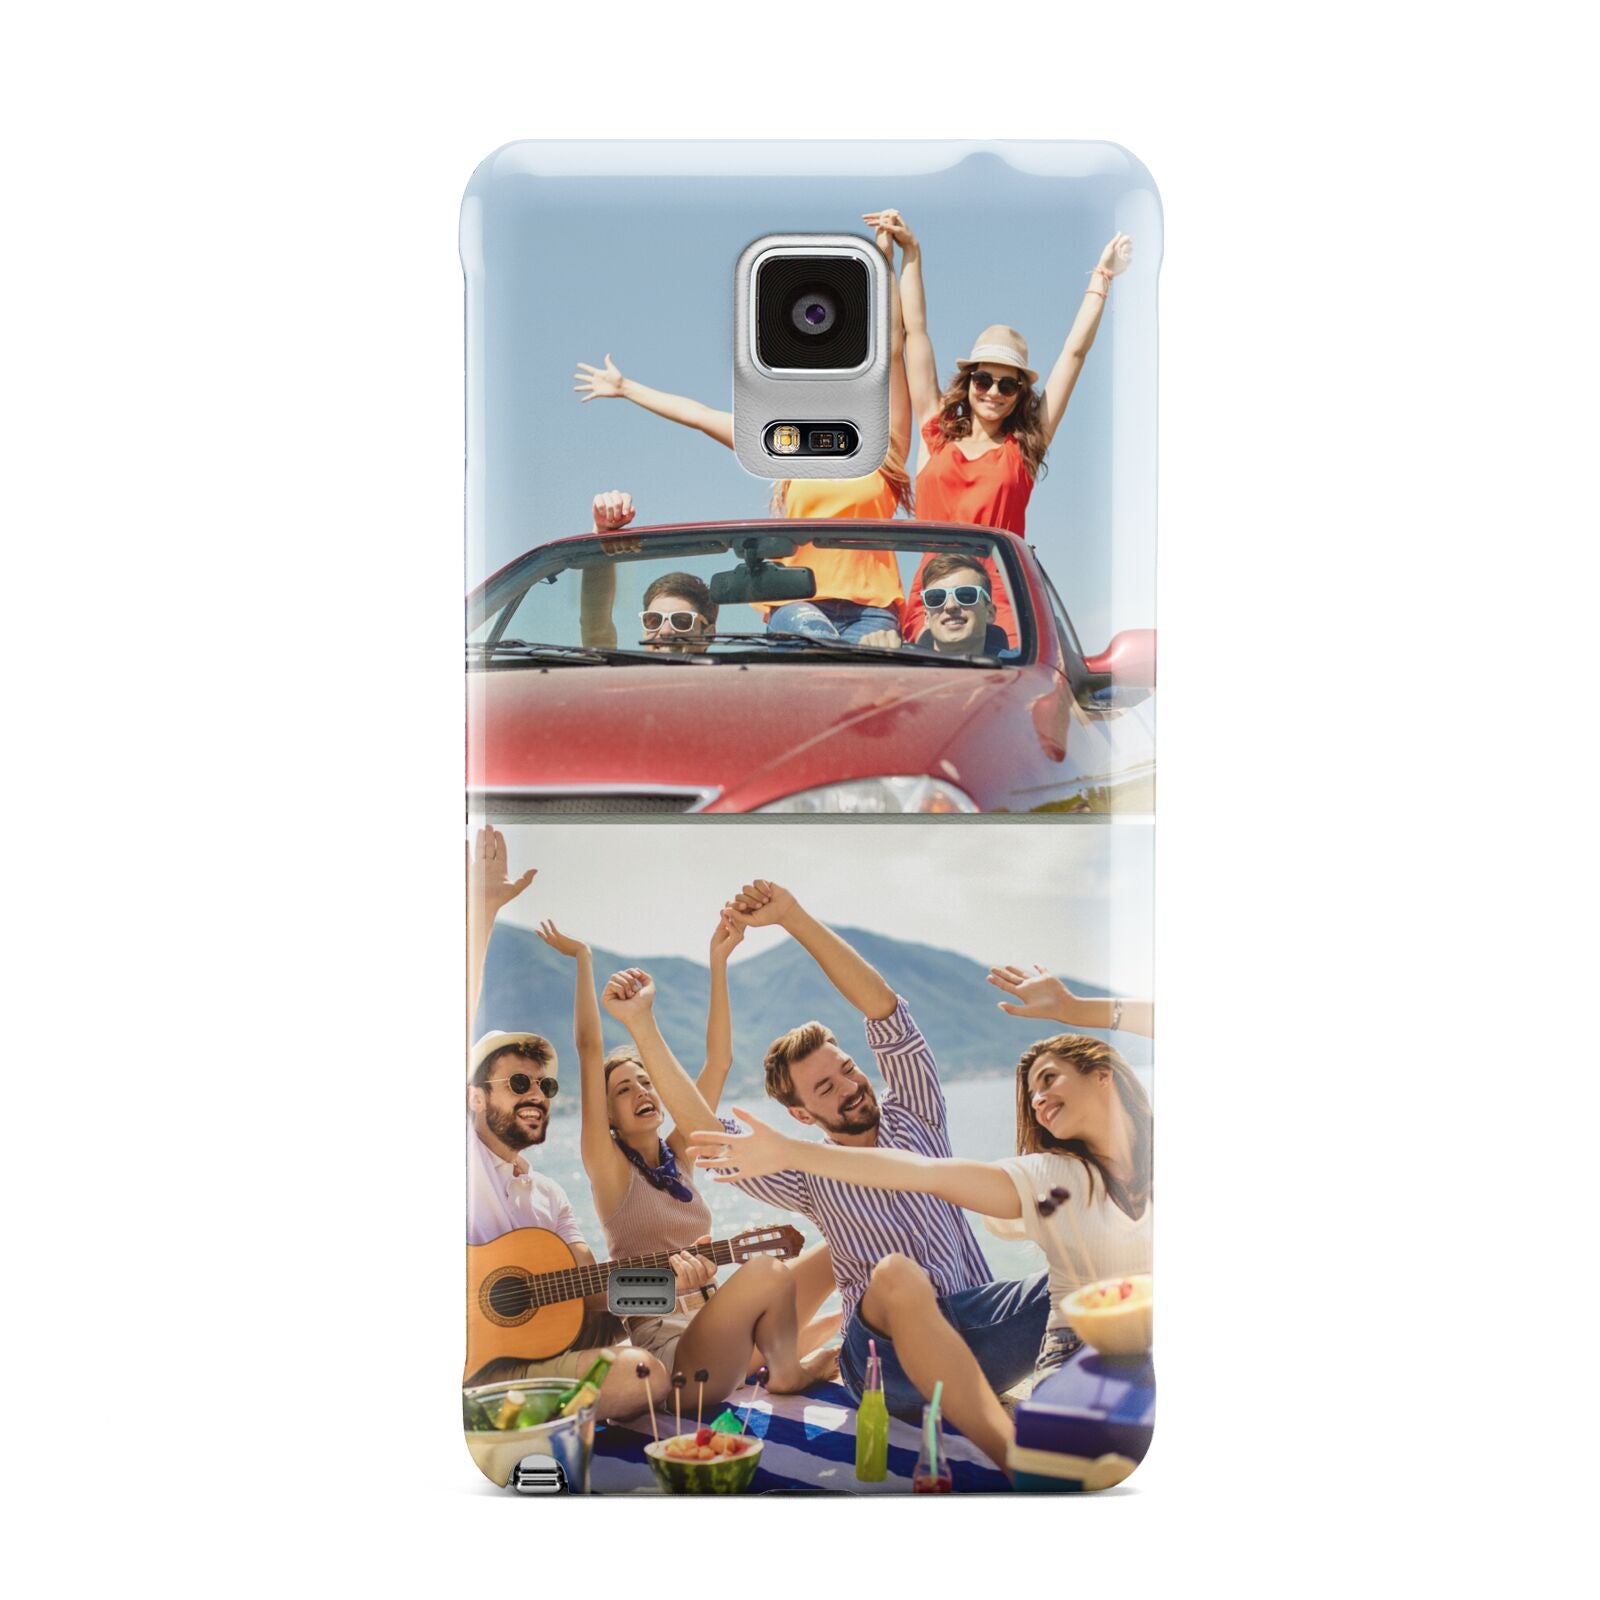 Two Photo Samsung Galaxy Note 4 Case